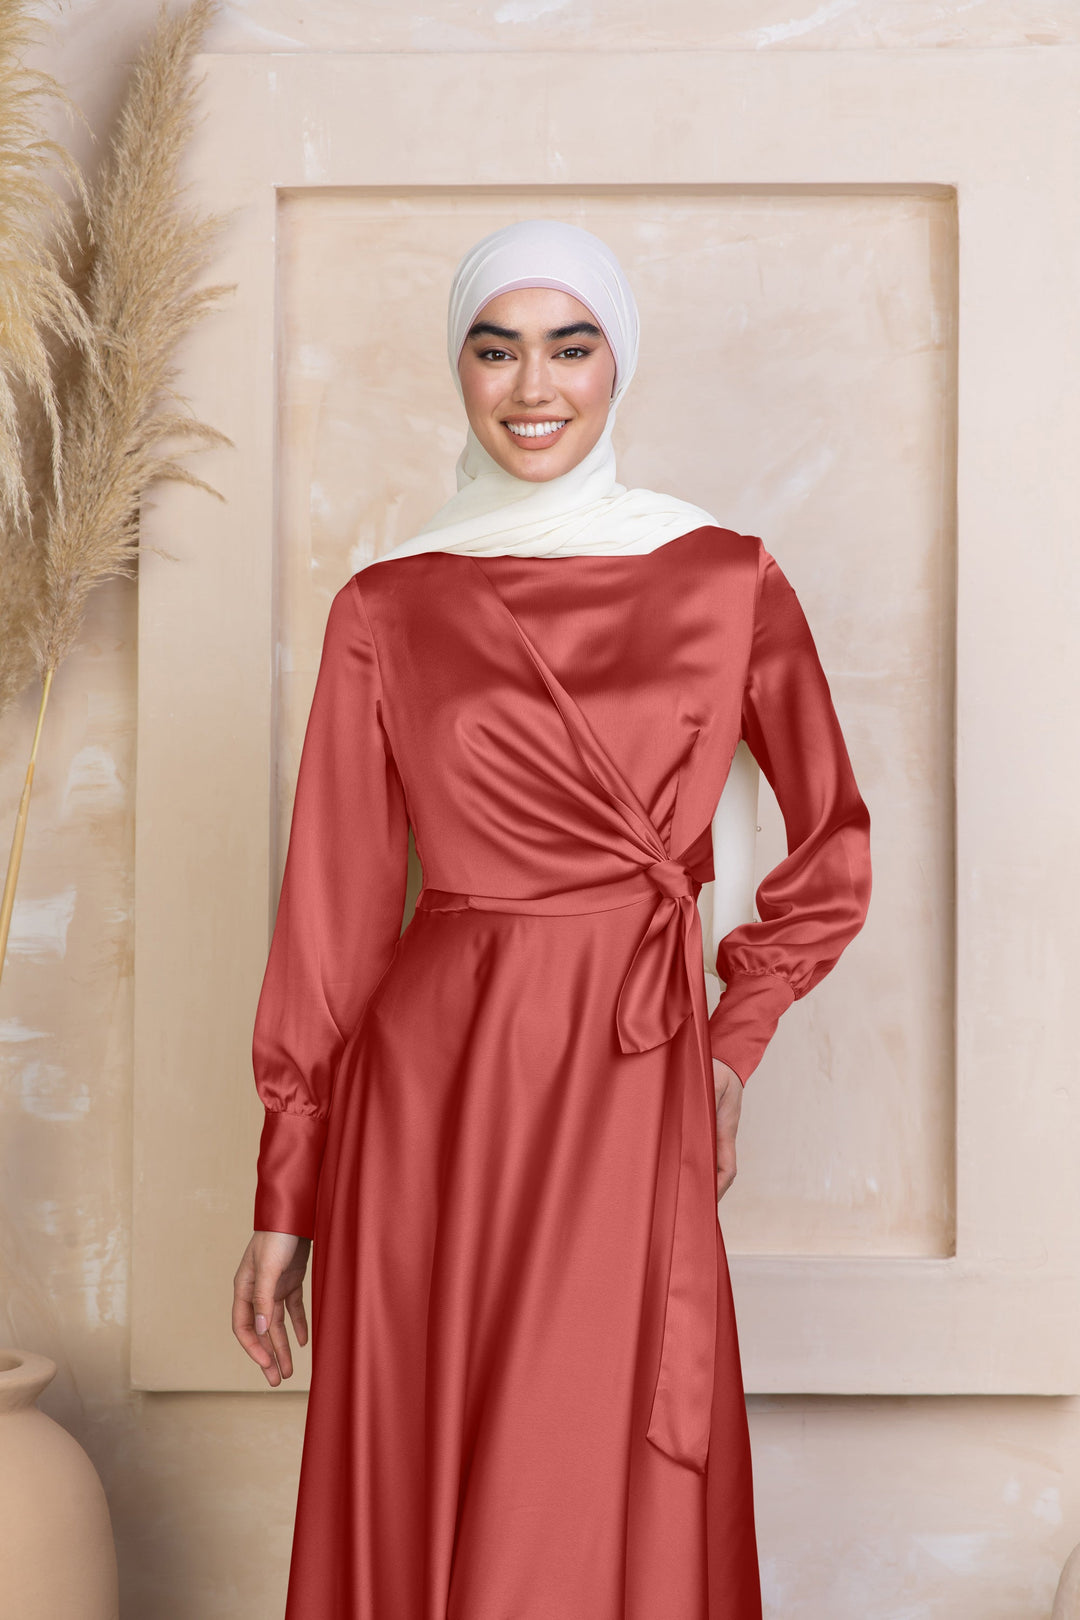 a woman wearing a red dress with a white hijab